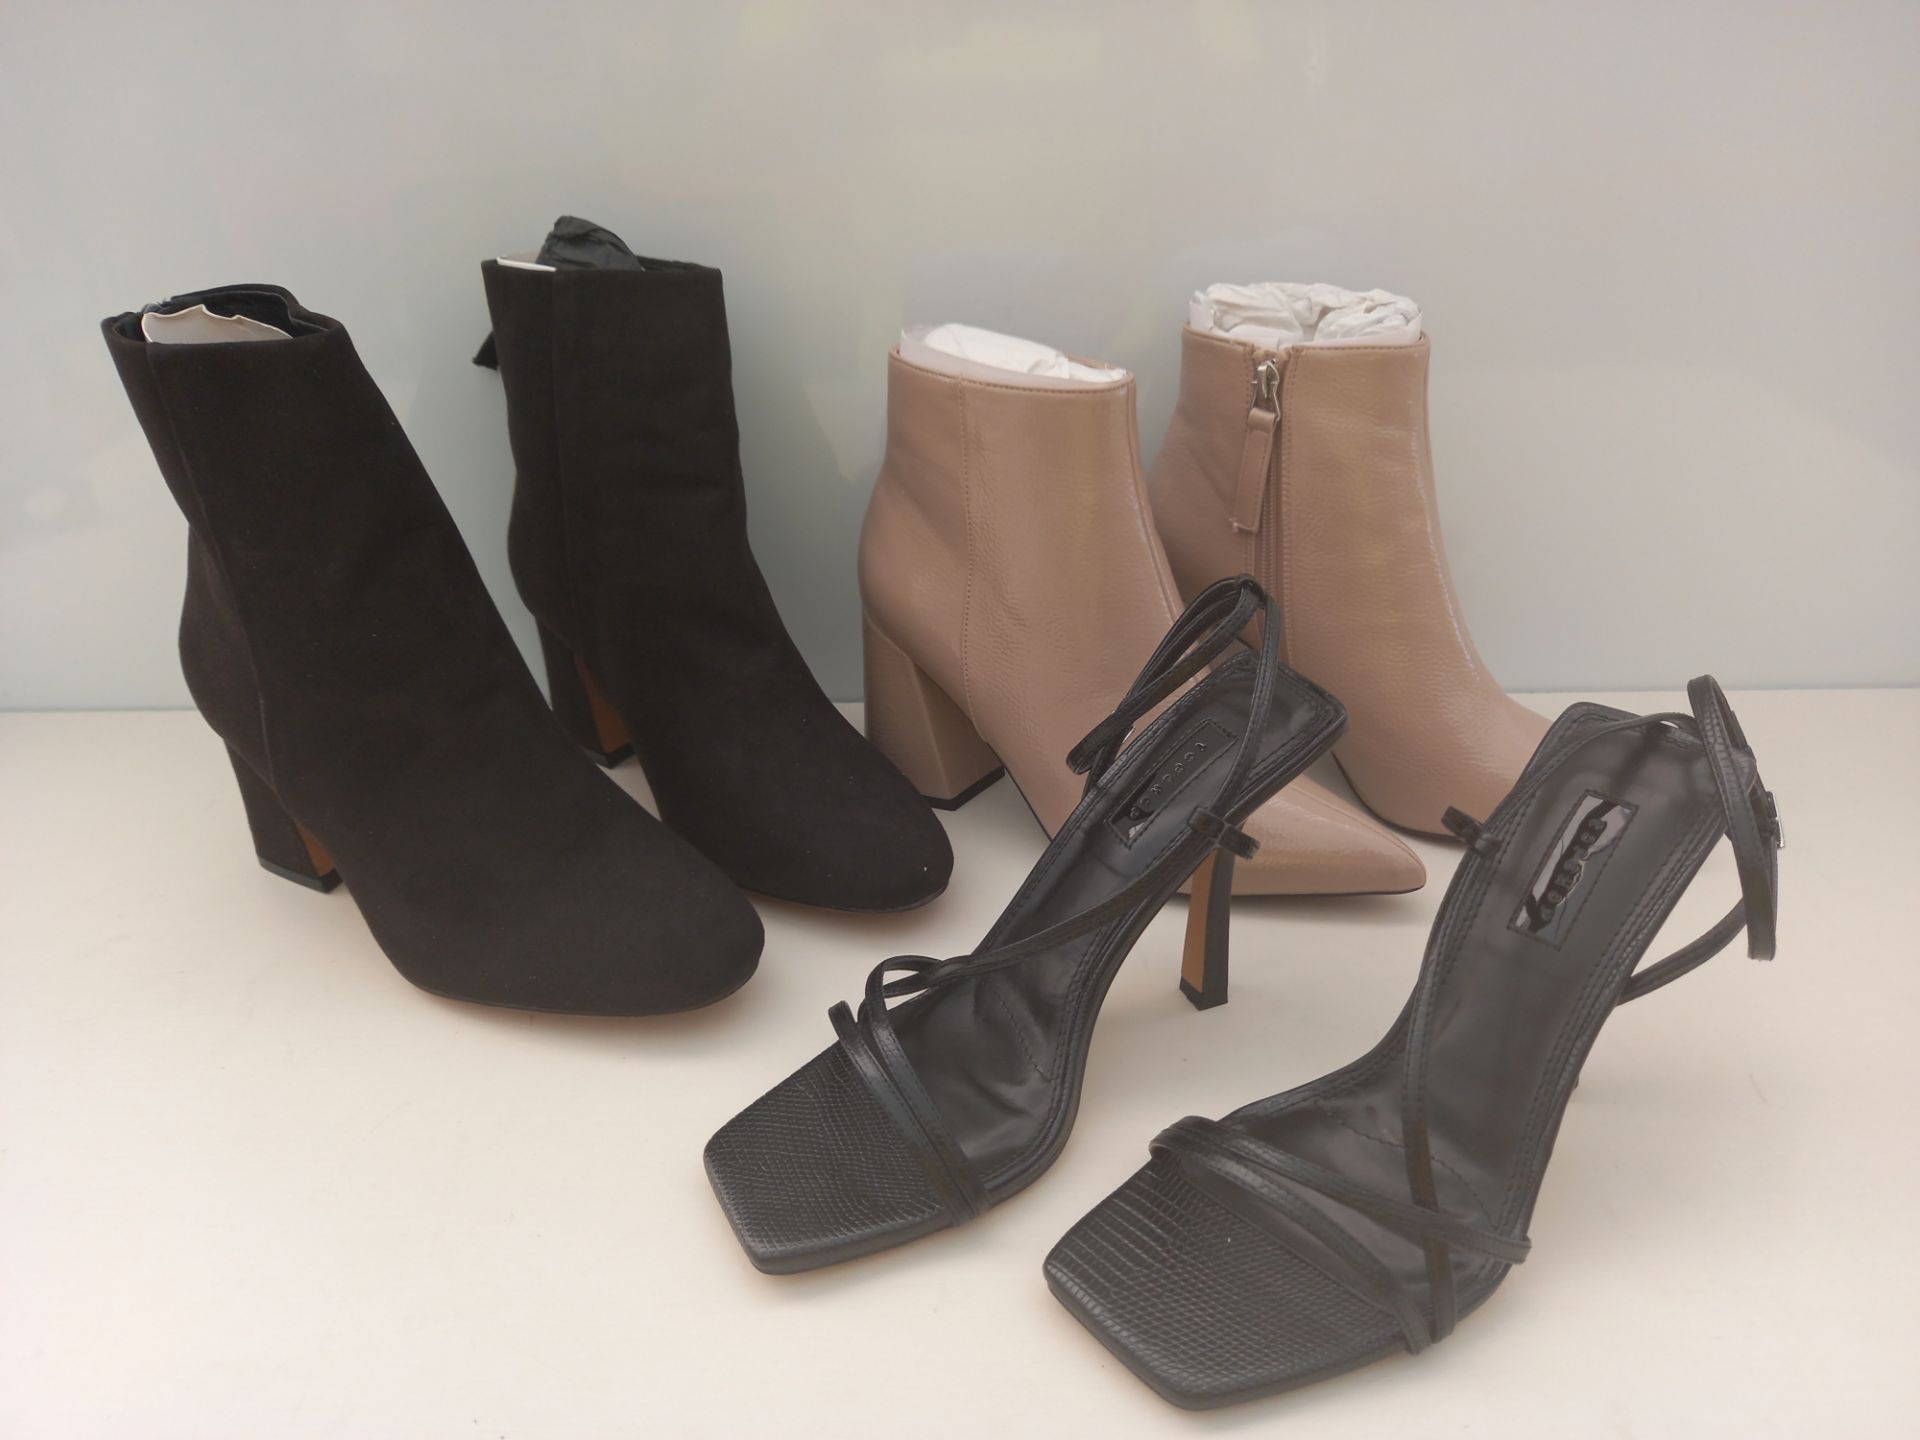 28 PIECE MIXED TOPSHOP SHOE LOT CONTAINING WF BELIZE SUEDE ZIP UP ANKLE BOOTS UK SIZE 6 RRP £39.